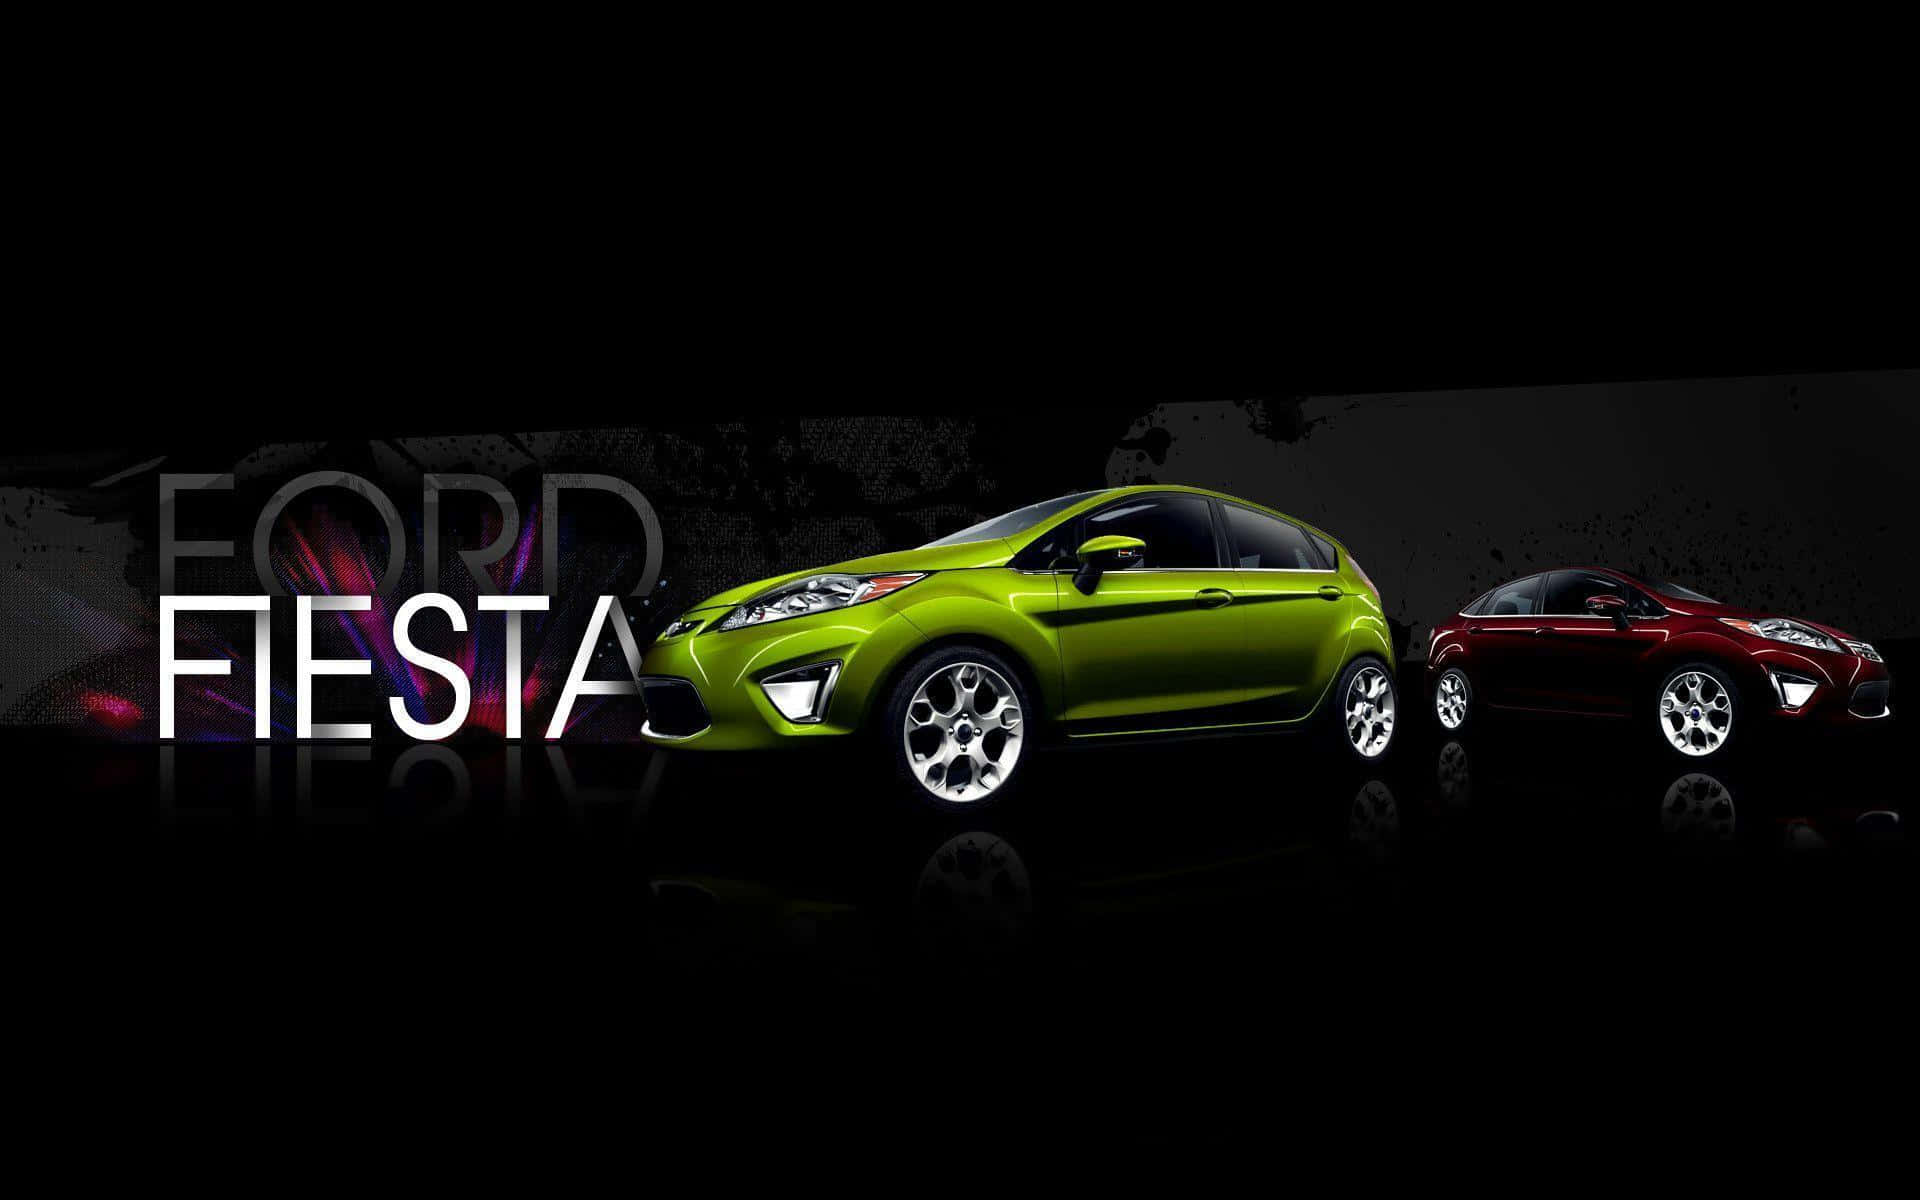 Captivating Ford Fiesta on the Road Wallpaper